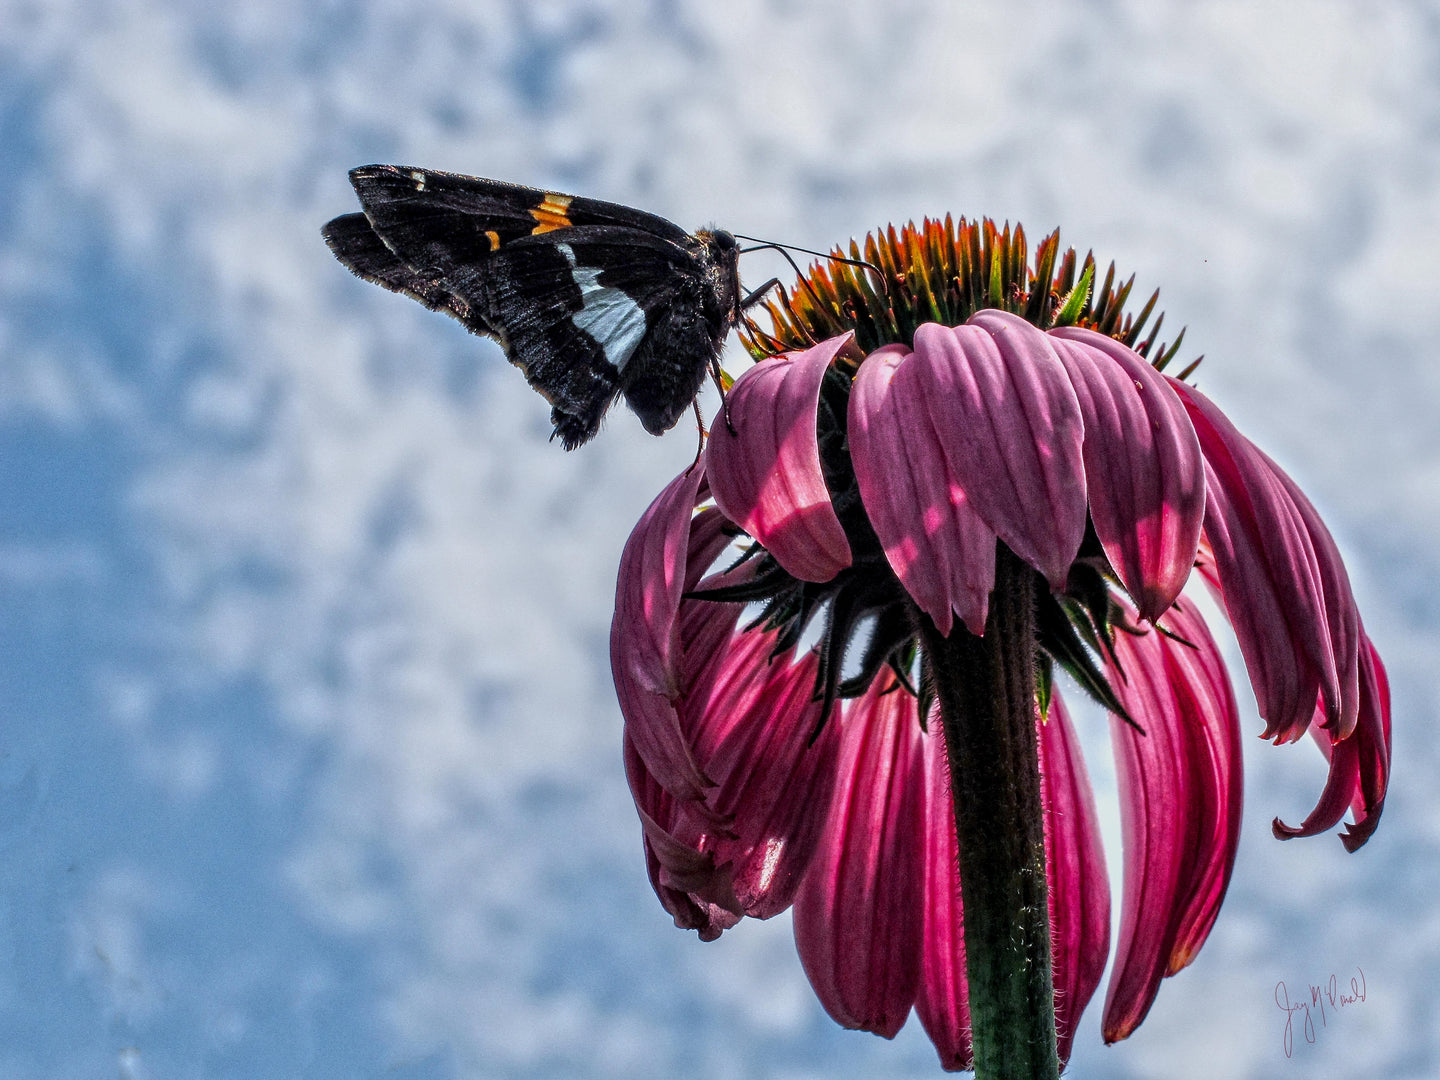 Coneflower with Visitor by Jay McDonald